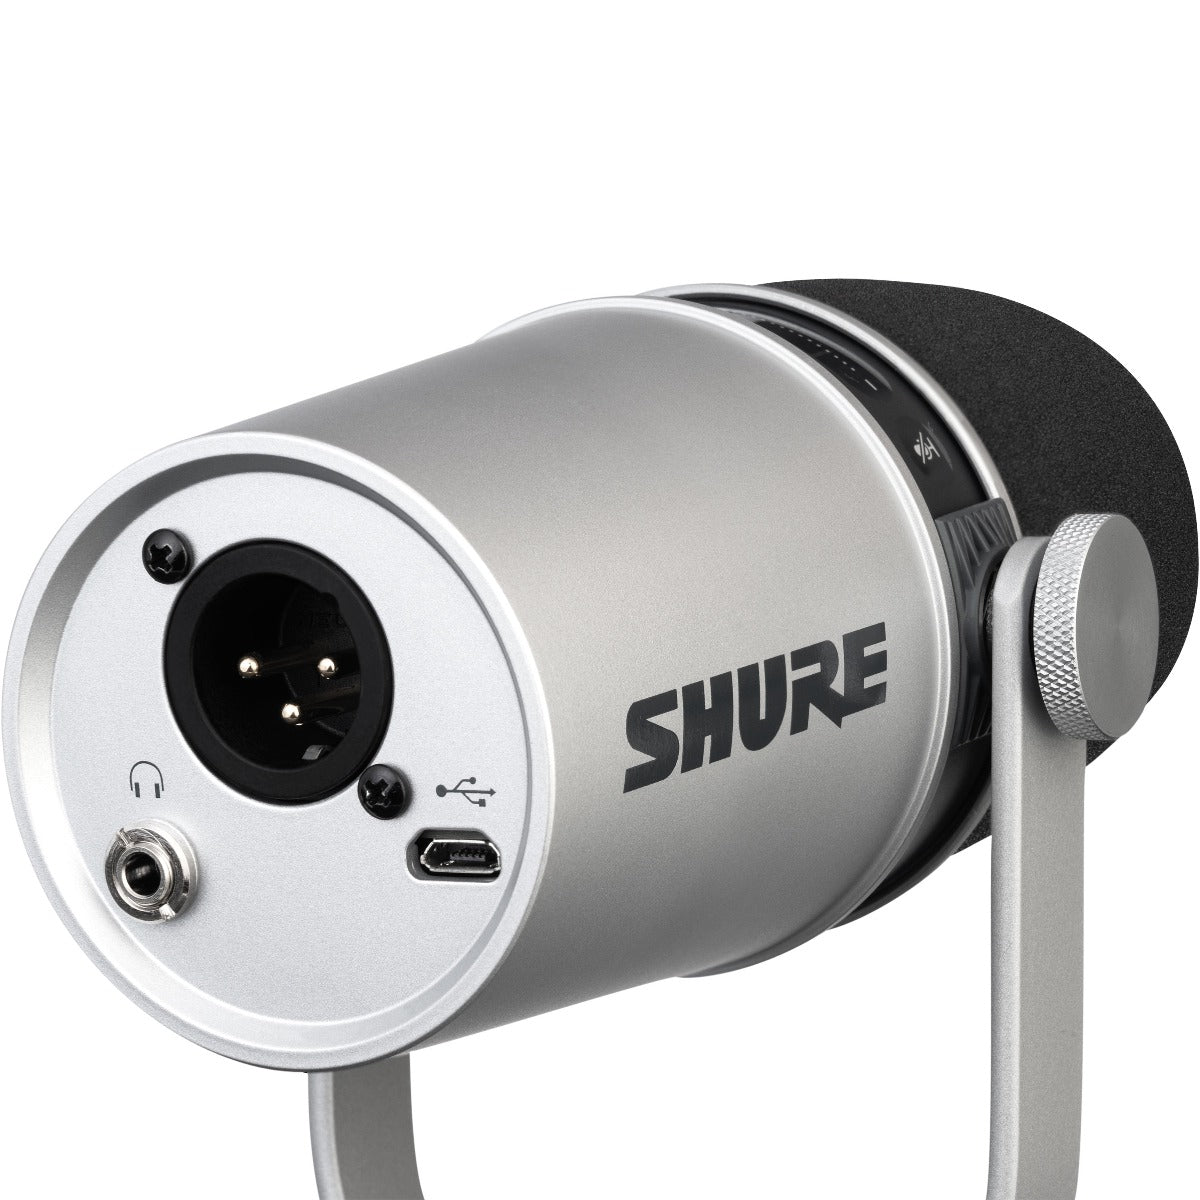 3/4 view of Shure MV7 Podcast Microphone - Silver with integrated yoke in stand position showing rear, top and left side